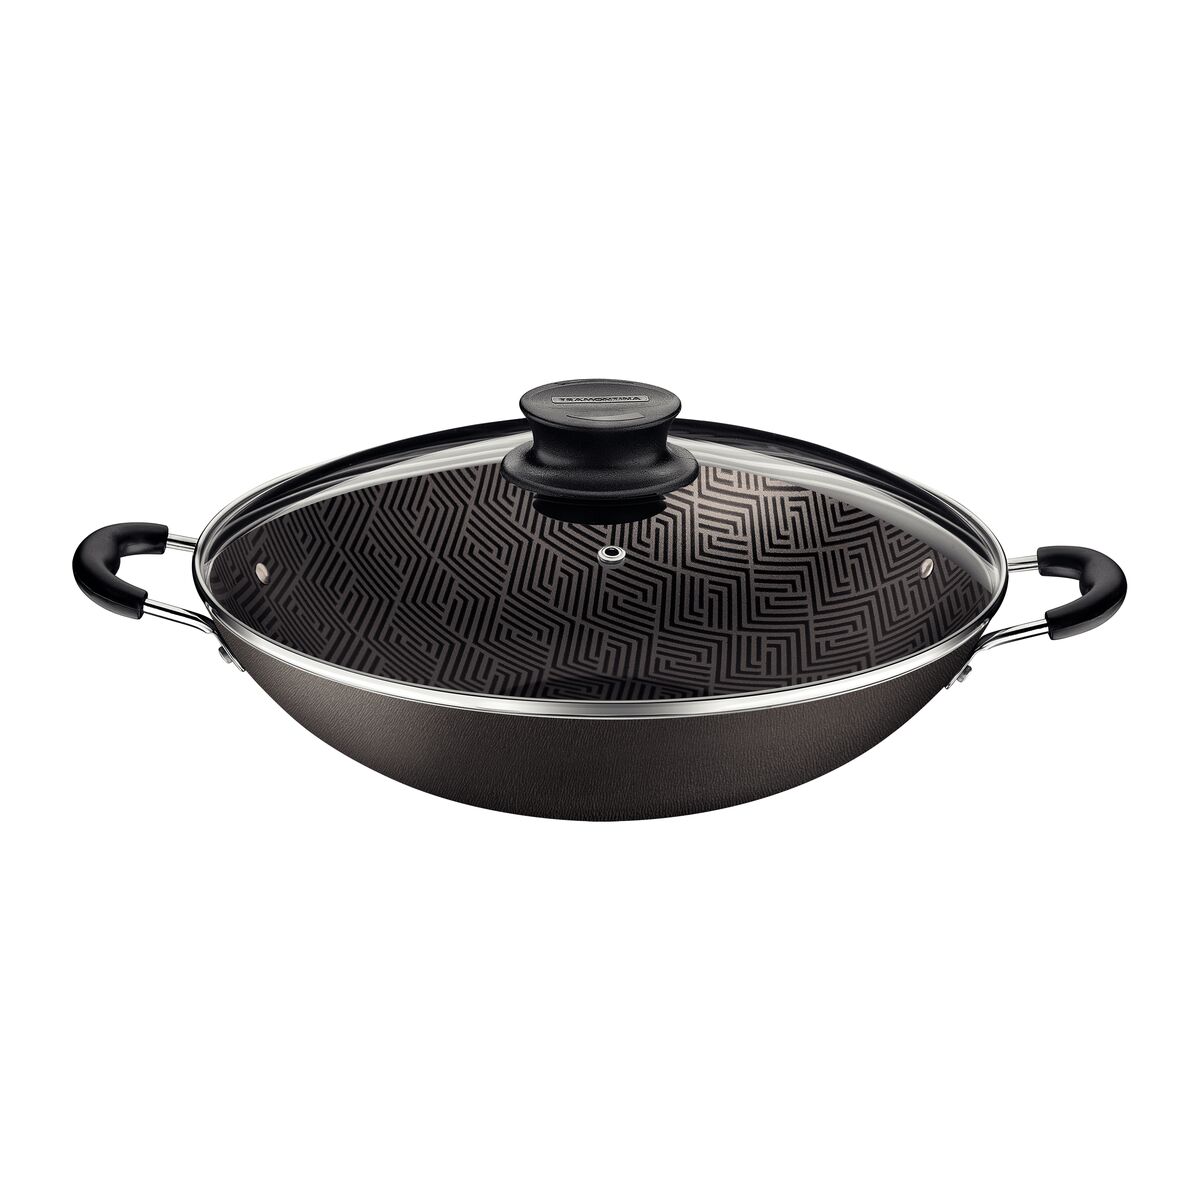 Tramontina Paris Aluminum Wok with Interior and Exterior Starflon Max Lead  Nonstick Coating with a Glass Lid, 32 cm 4,4 L